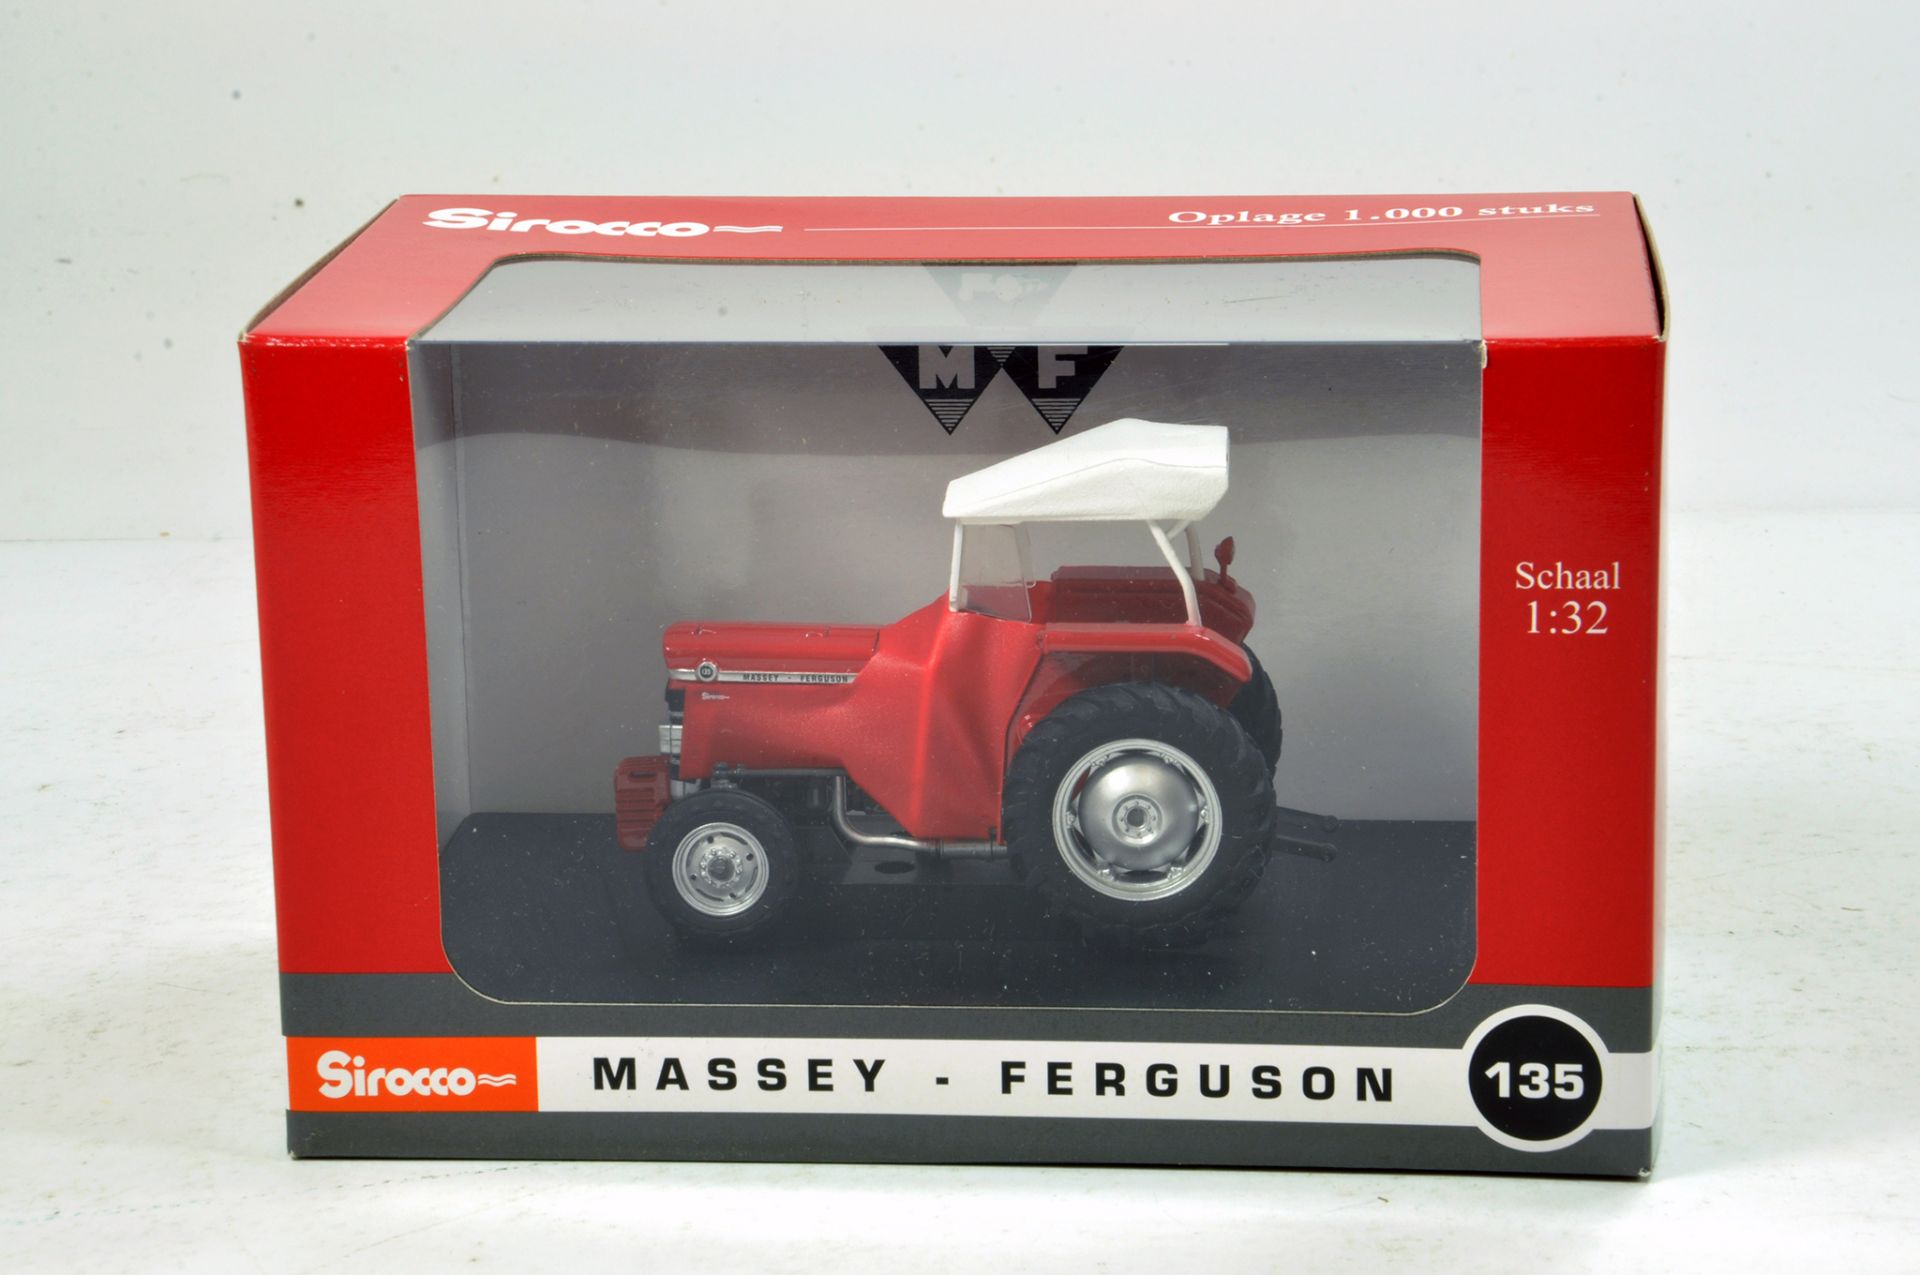 Universal Hobbies 1/32 Farm Issue Comprising Massey Ferguson 135 Special Edition Tractor. NM in